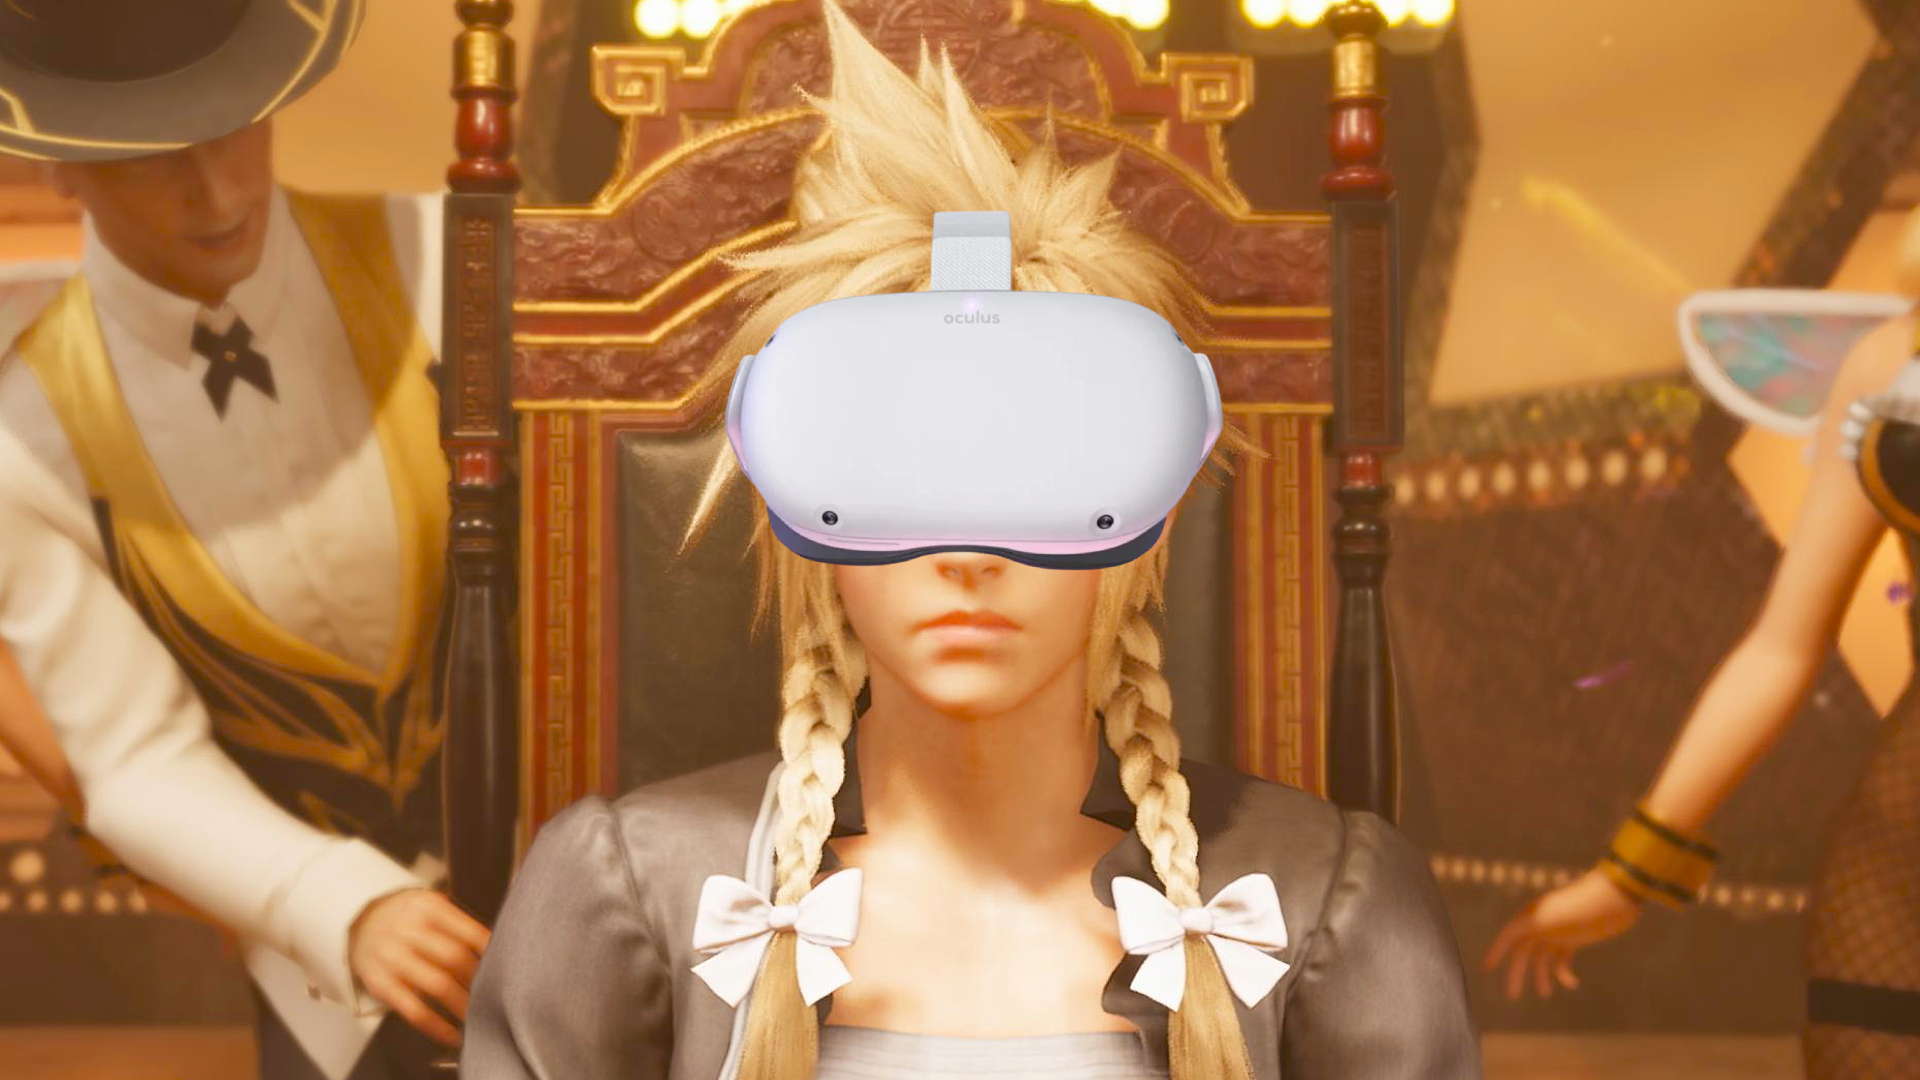 You can now play Final Fantasy 7 remake using an Oculus Quest 2